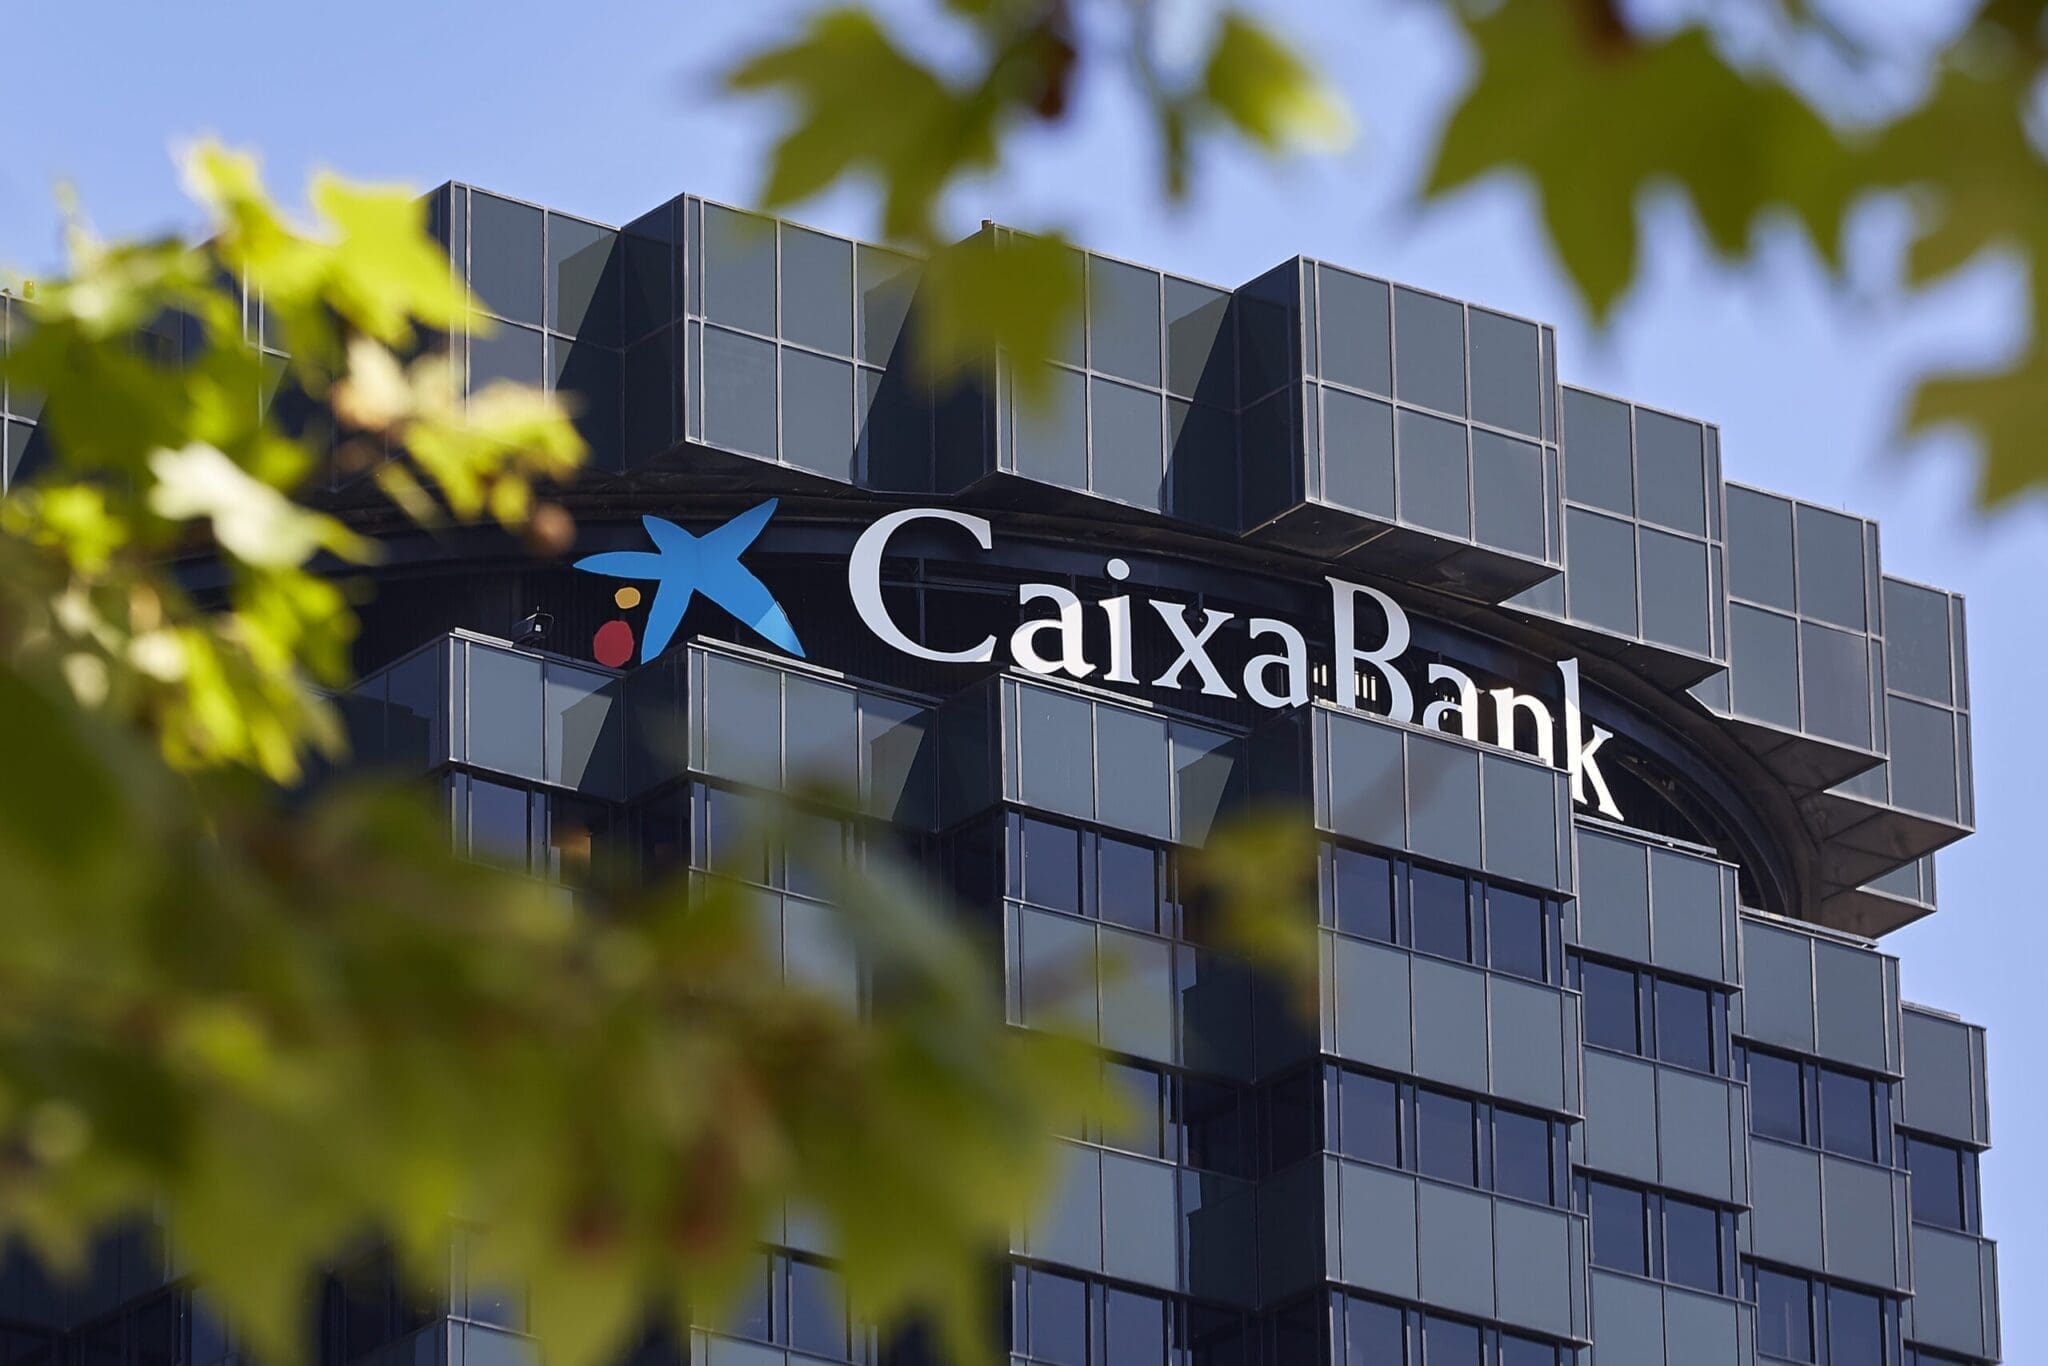 CaixaBank is improving suppliers’ ESG credentials using Achilles